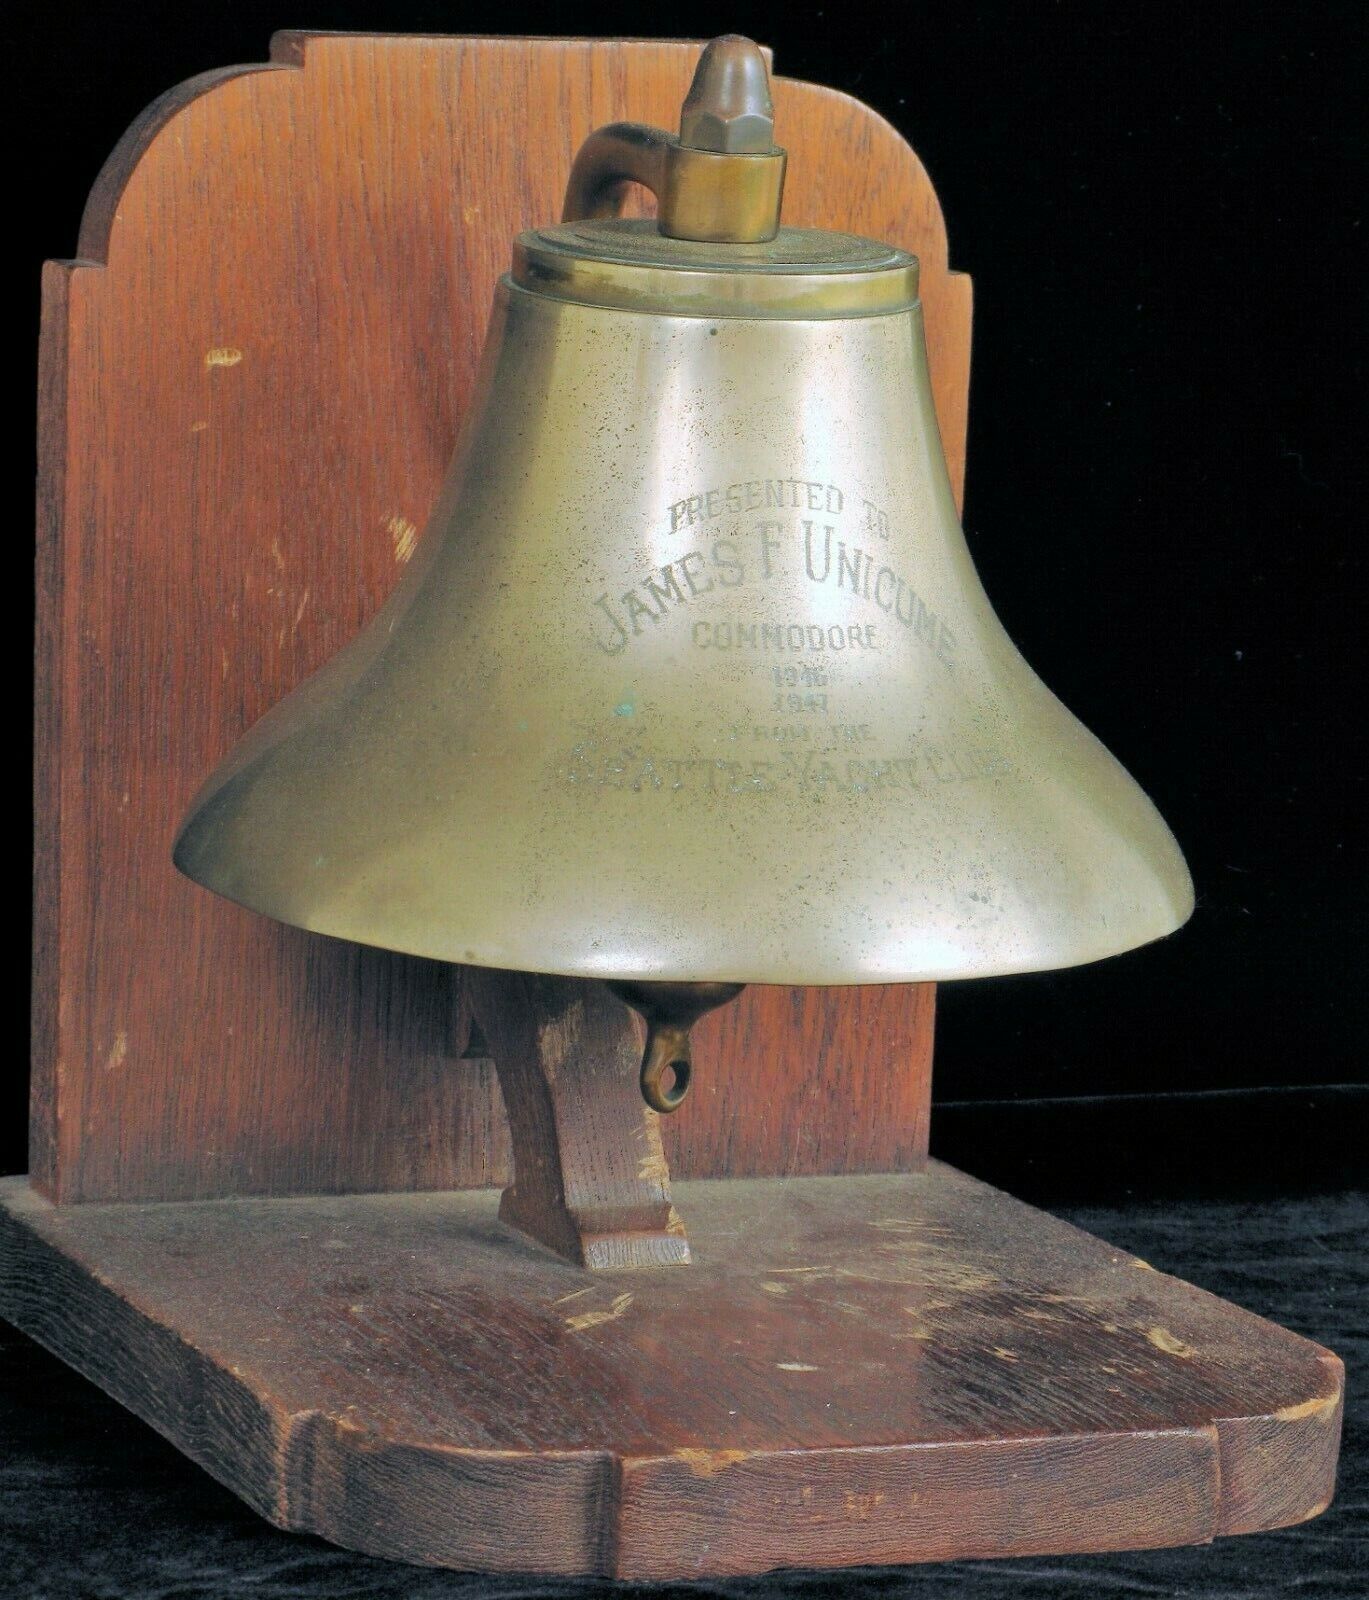 ANTIQUE 1947 MARITIME SHIP'S BELL PRESENTED TO COMMODORE FROM SEATTLE YACHT CLUB